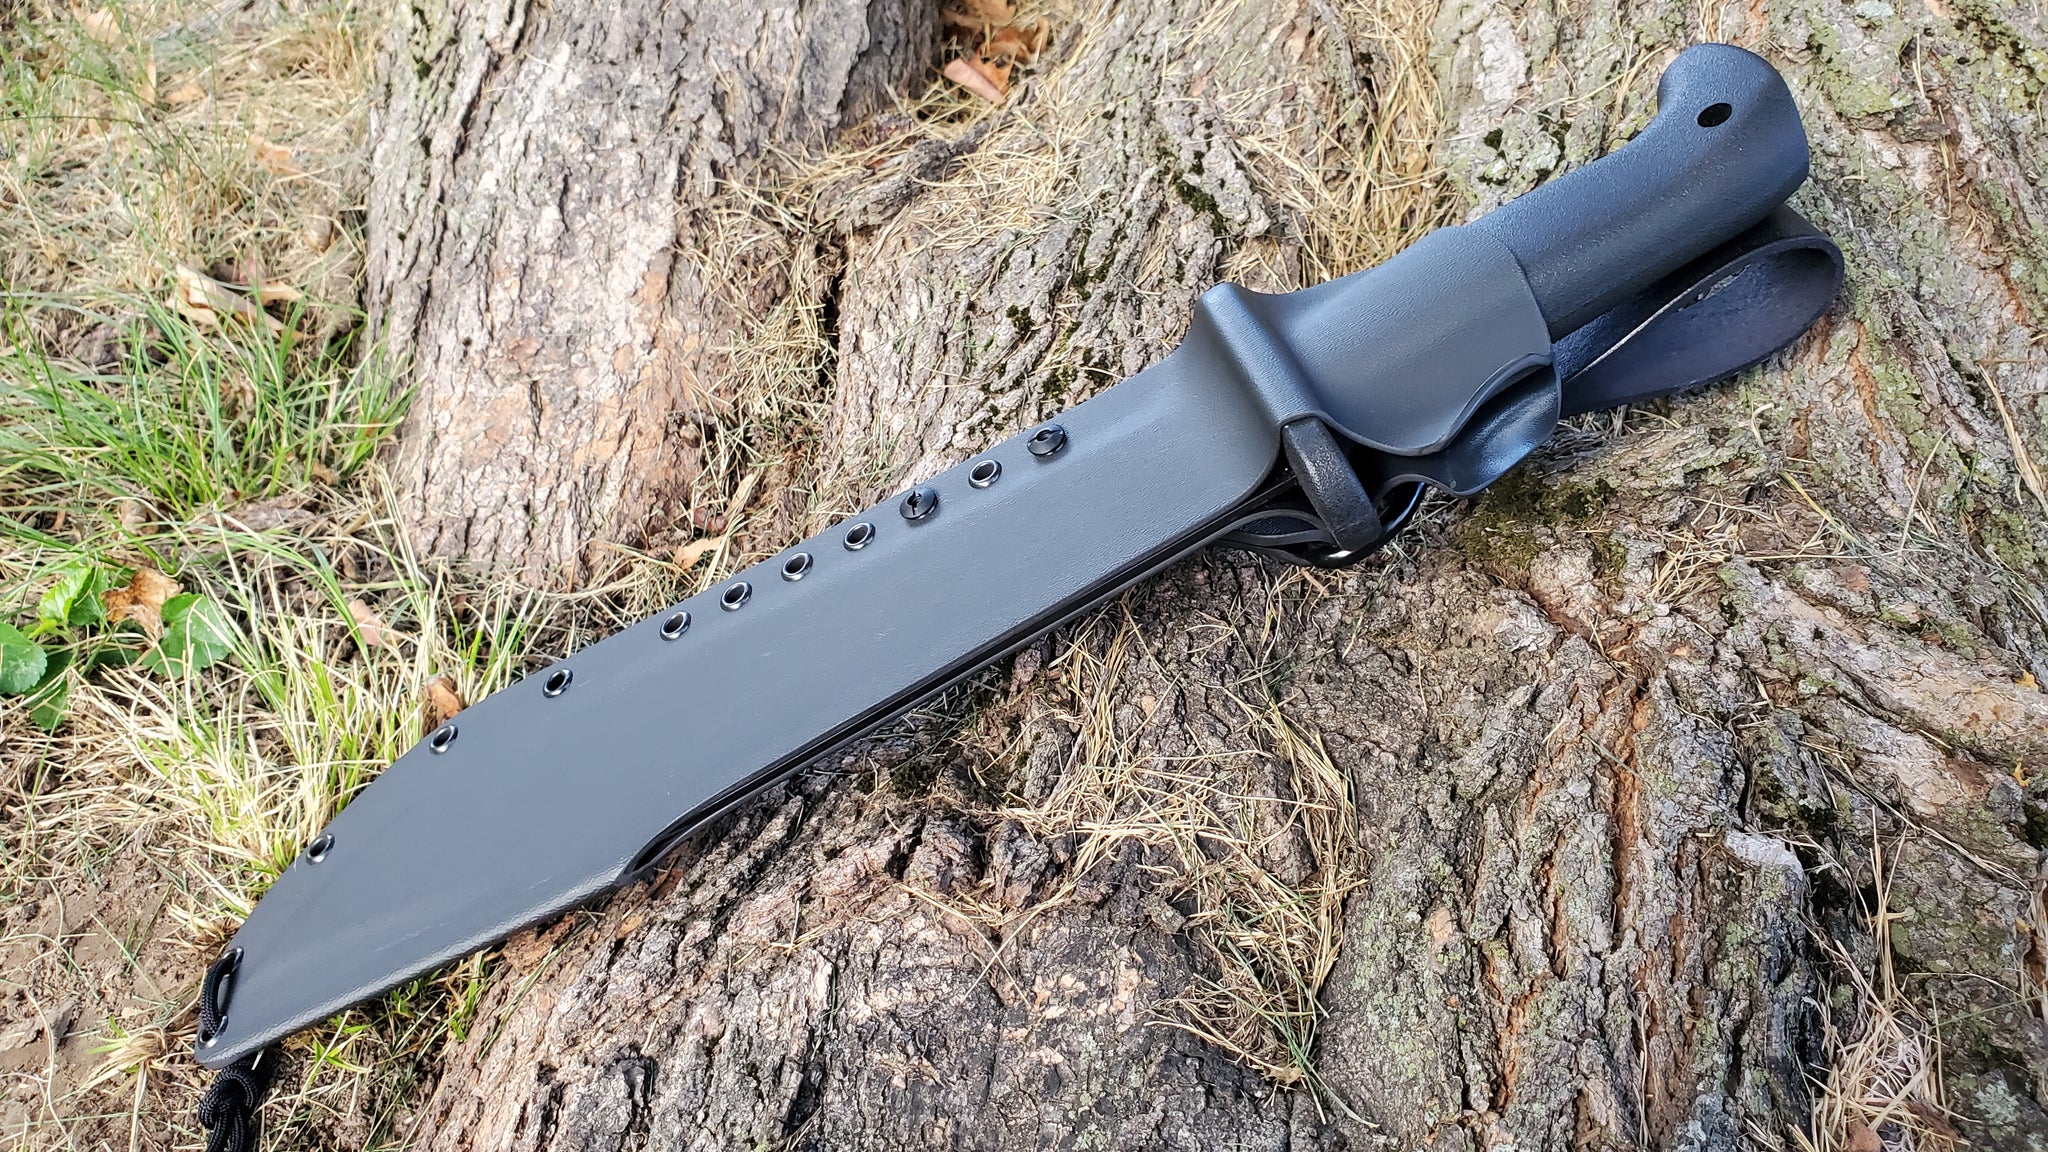 COLD STEEL "BLACK BEAR BOWIE" Kydex Taco Sheath with Leather Dangler